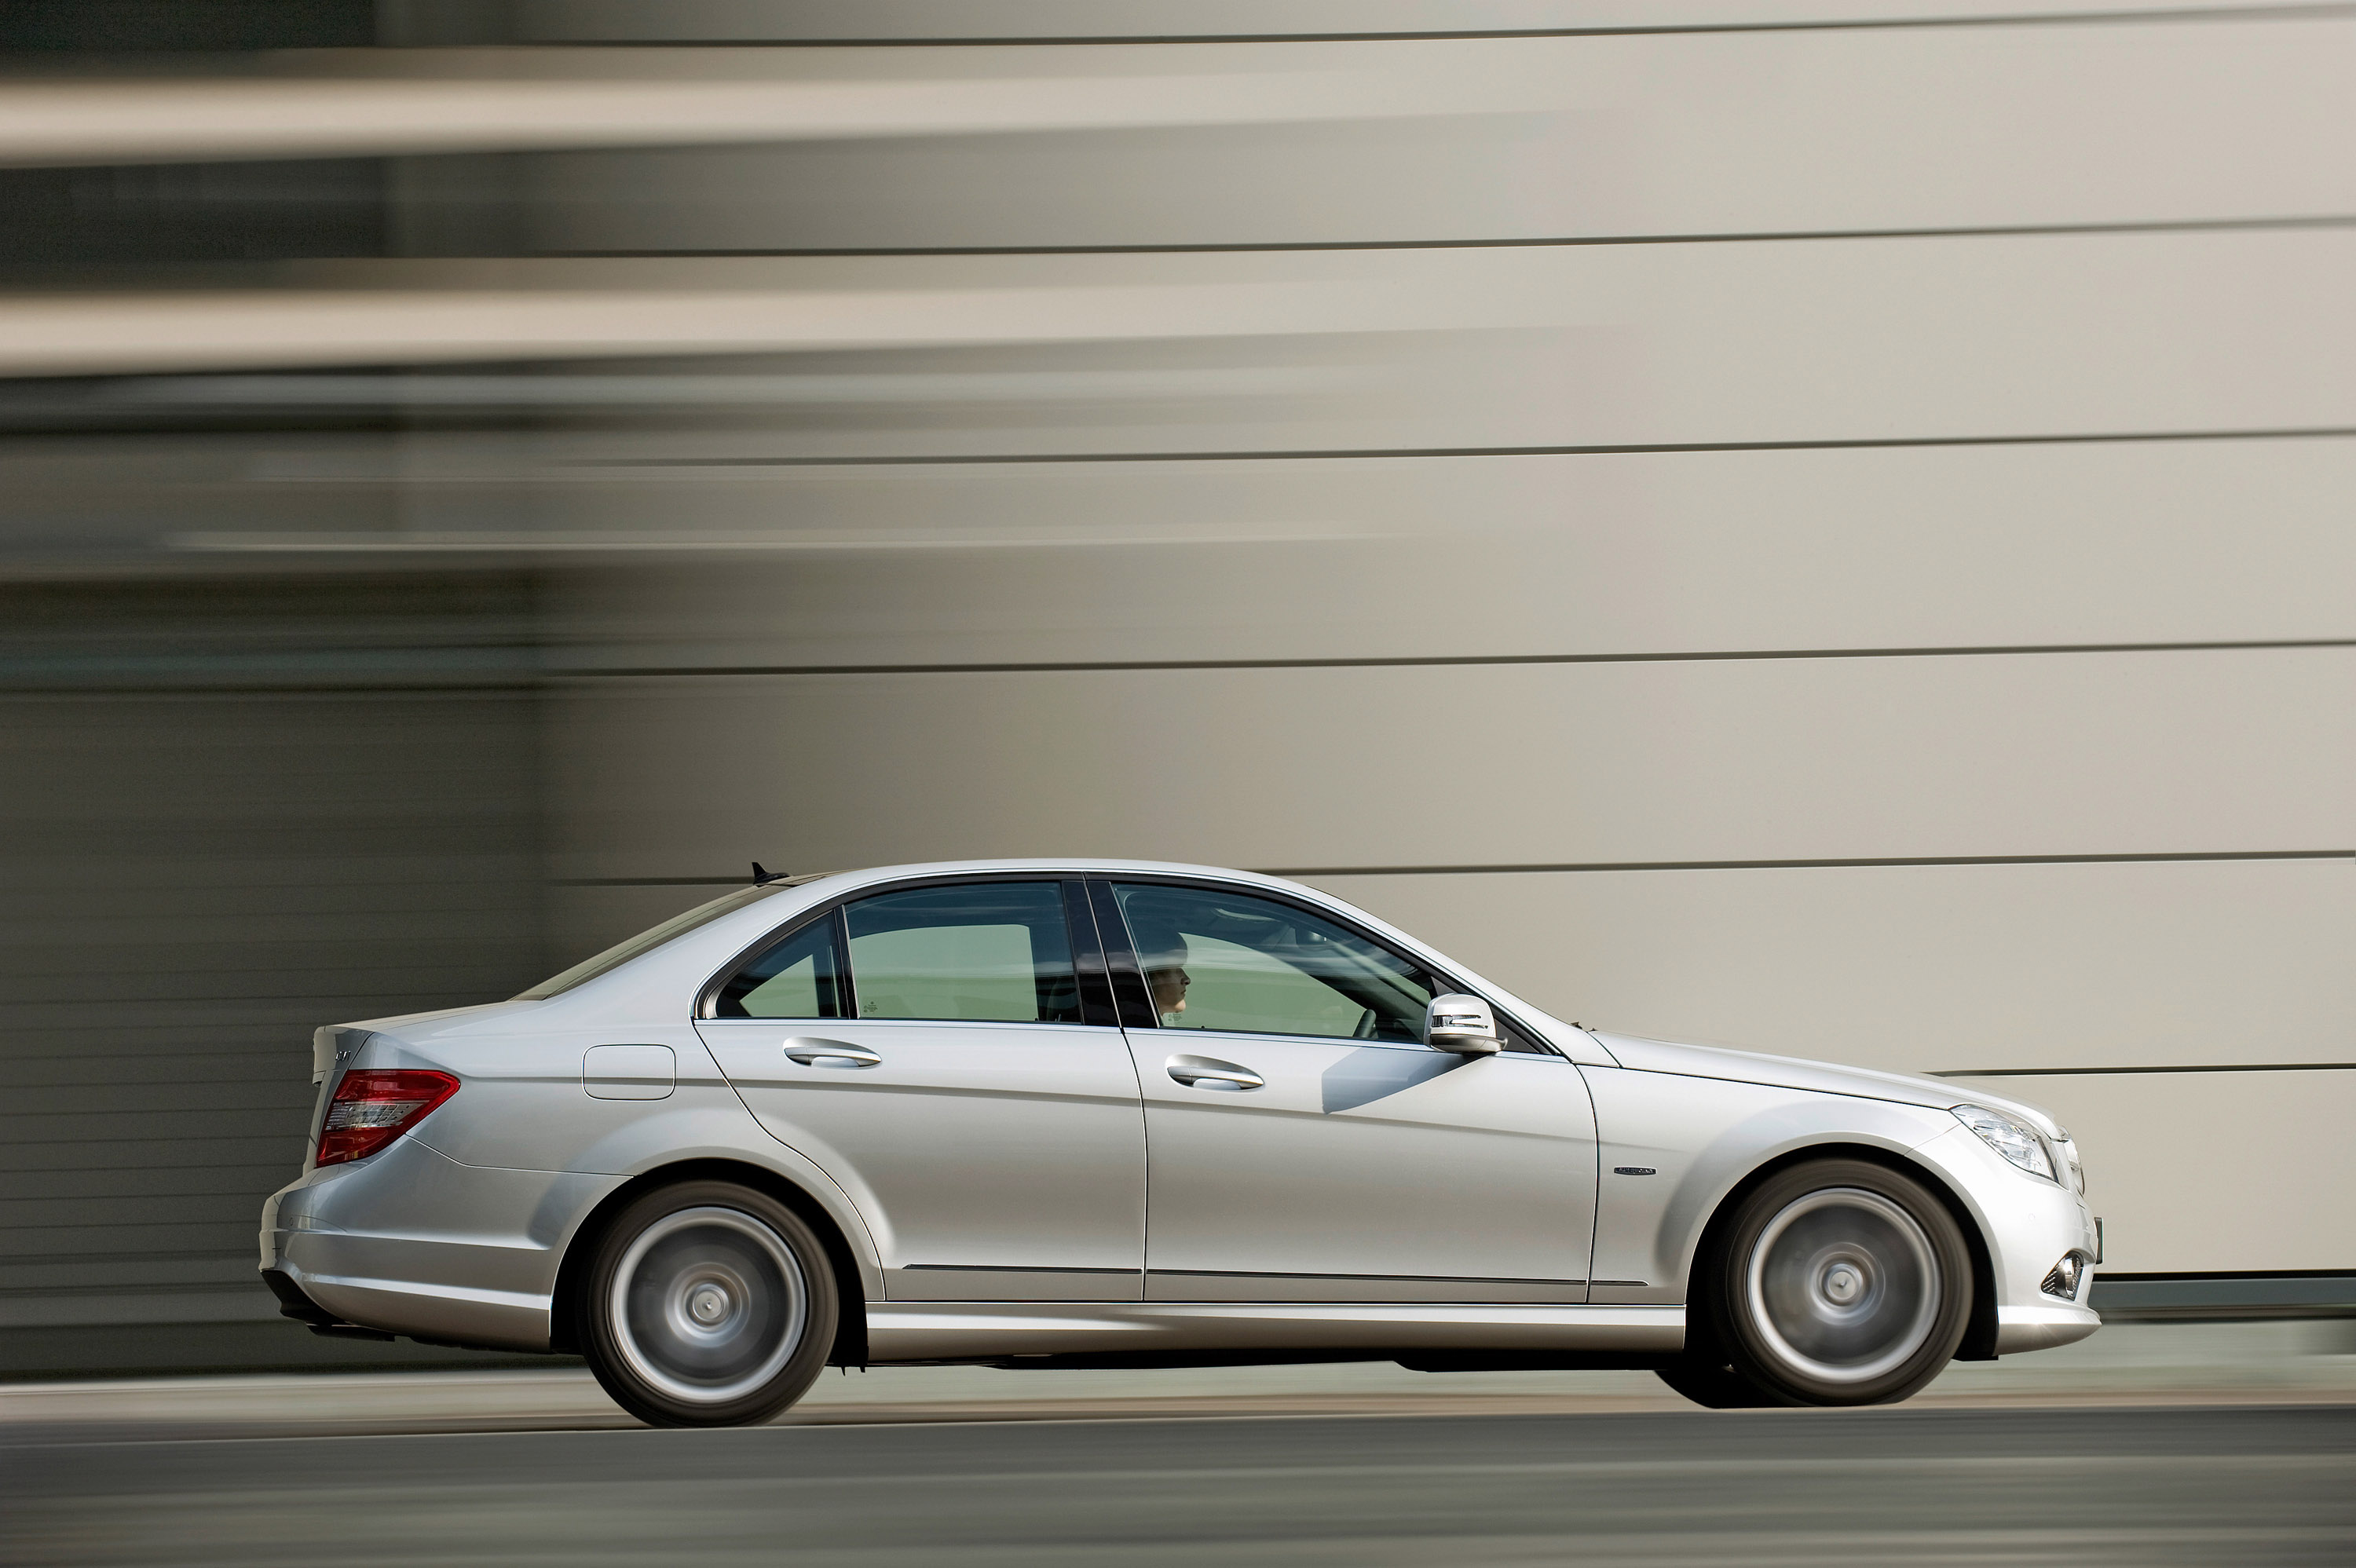 Mercedes Benz C Class Is The Most Reliable Car According To Adac Breakdown Statistics